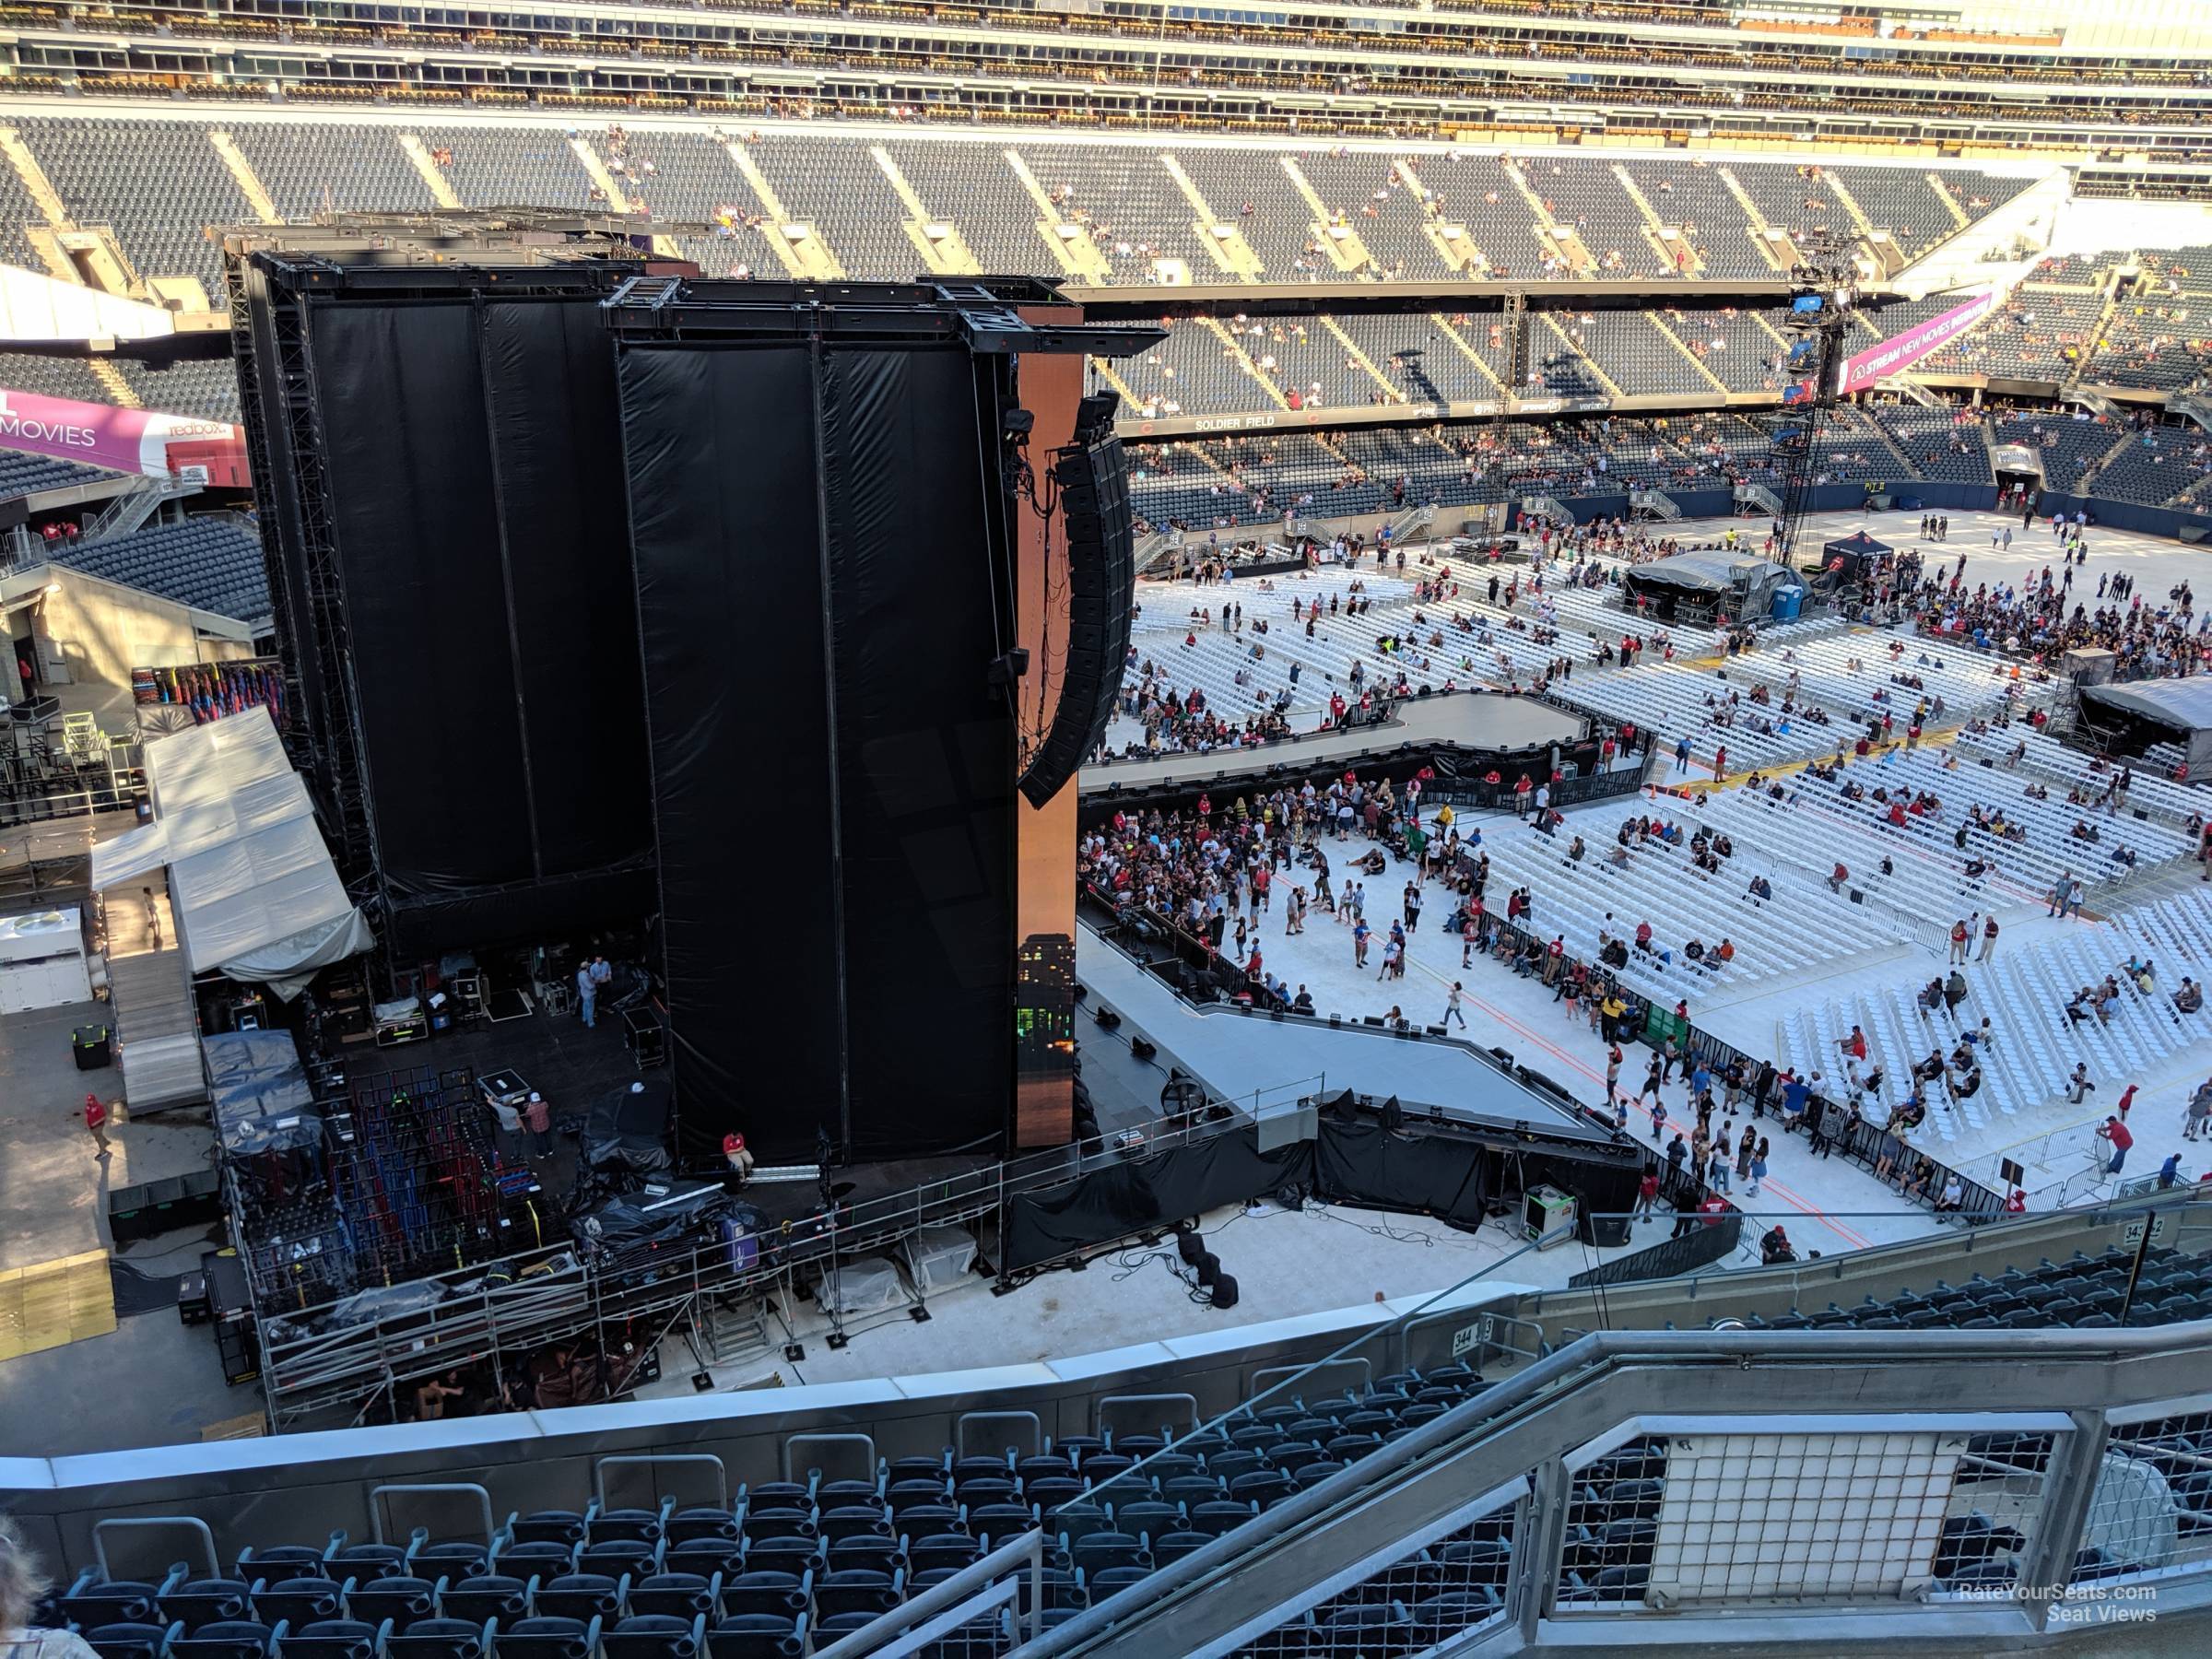 section 444, row 3 seat view  for concert - soldier field